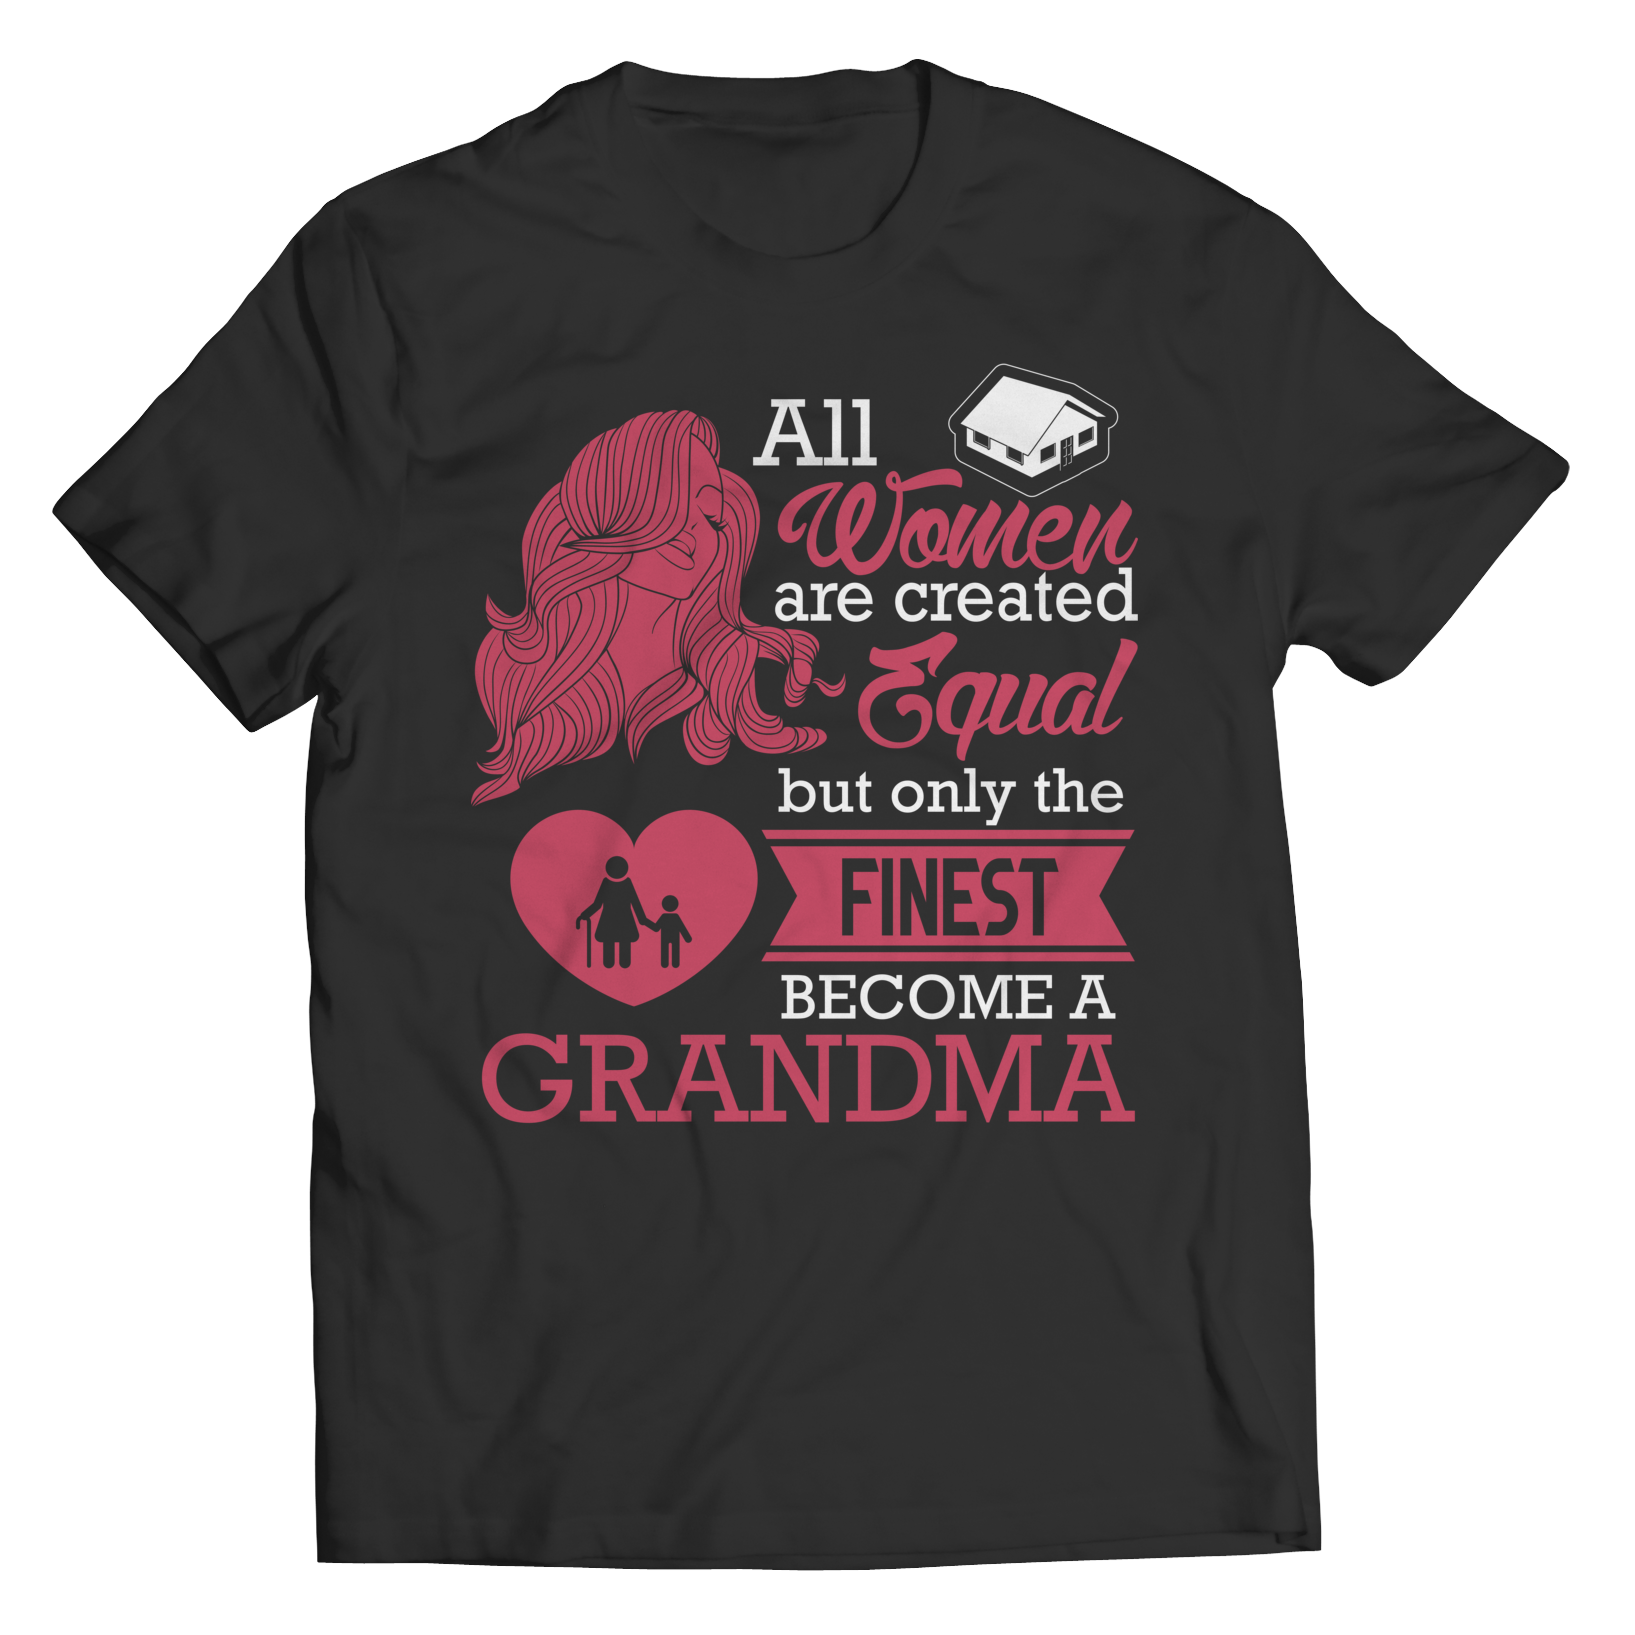 Limited Edition - All Women Are Created Equal But The Finest Become A Grandma TEE SHIRT, LONG SLEEVE SHIRT, LADIES CLASSIC TEE SHIRT, HOODIE